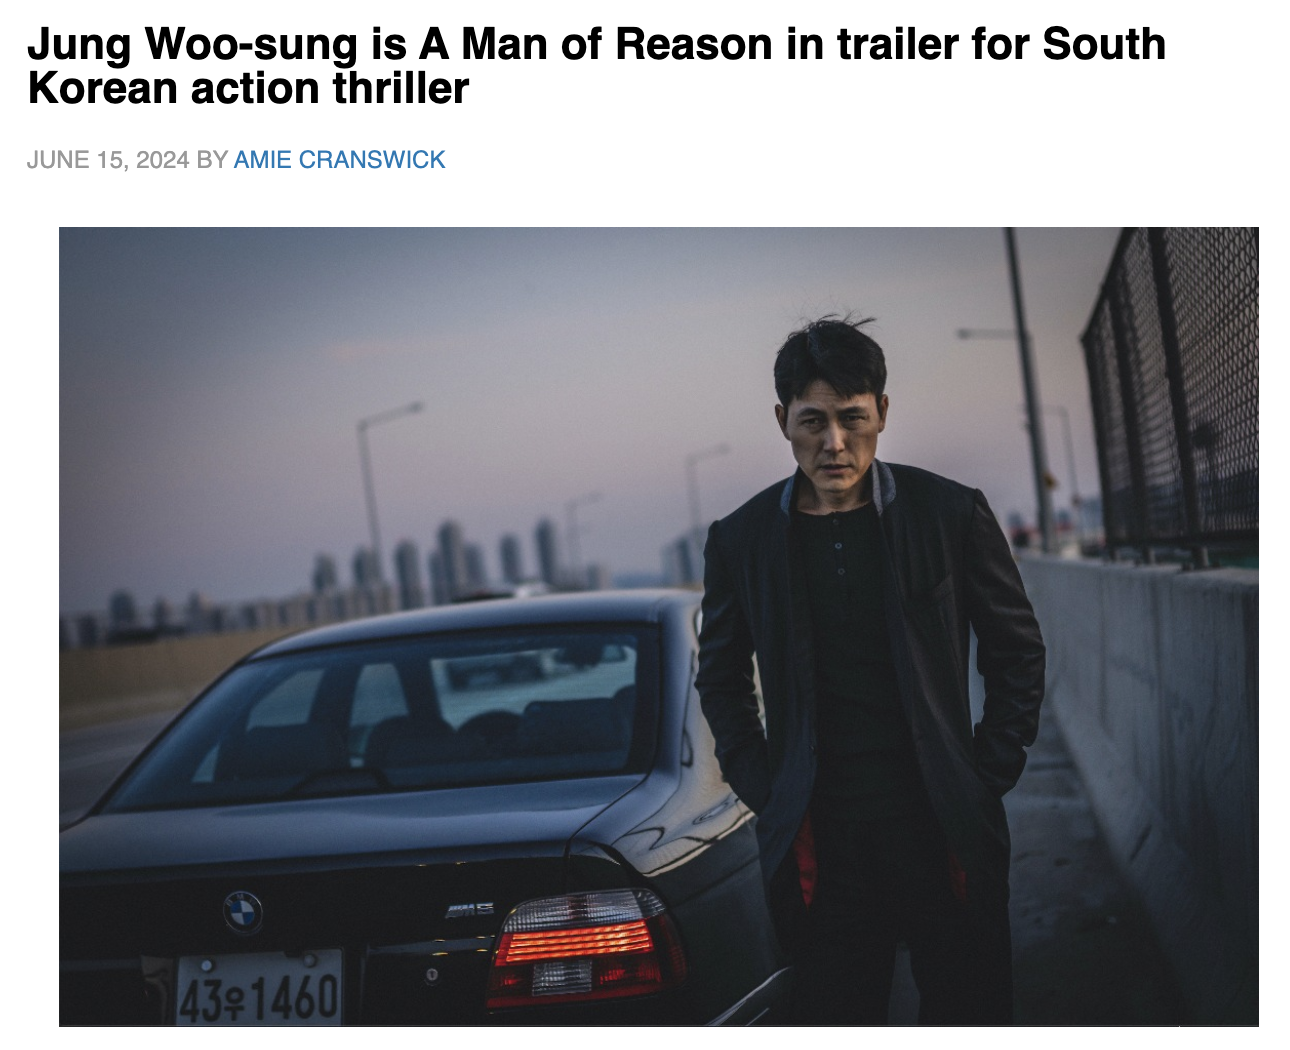 Jung Woo-sung is A Man of Reason in trailer for South Korean action thriller